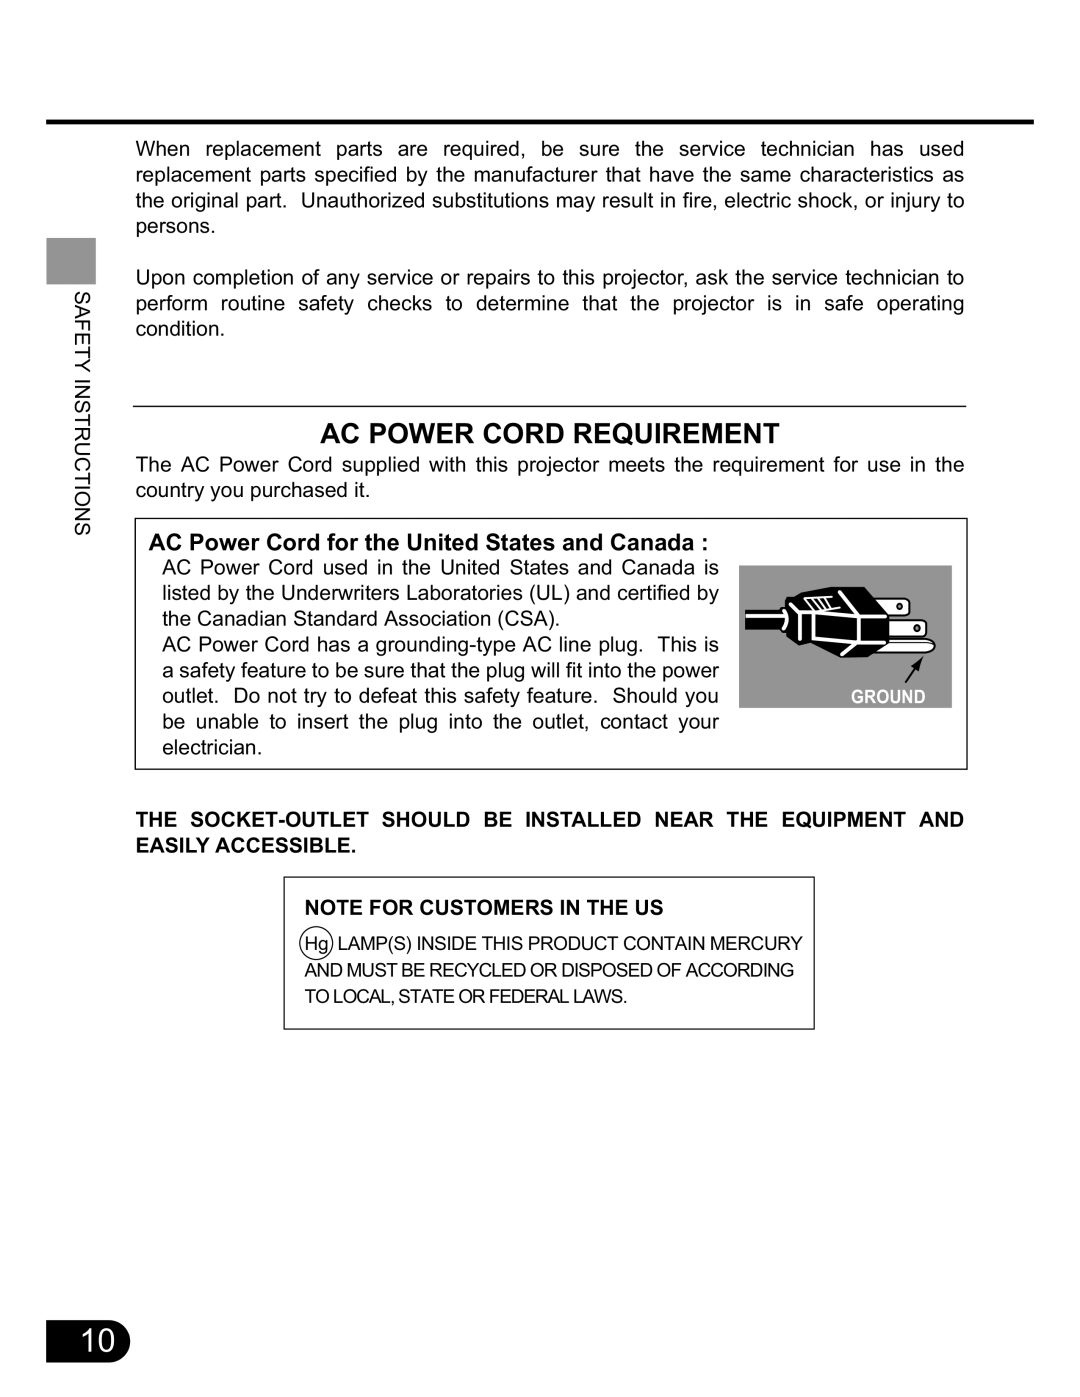 Canon SX20 manual AC Power Cord Requirement 